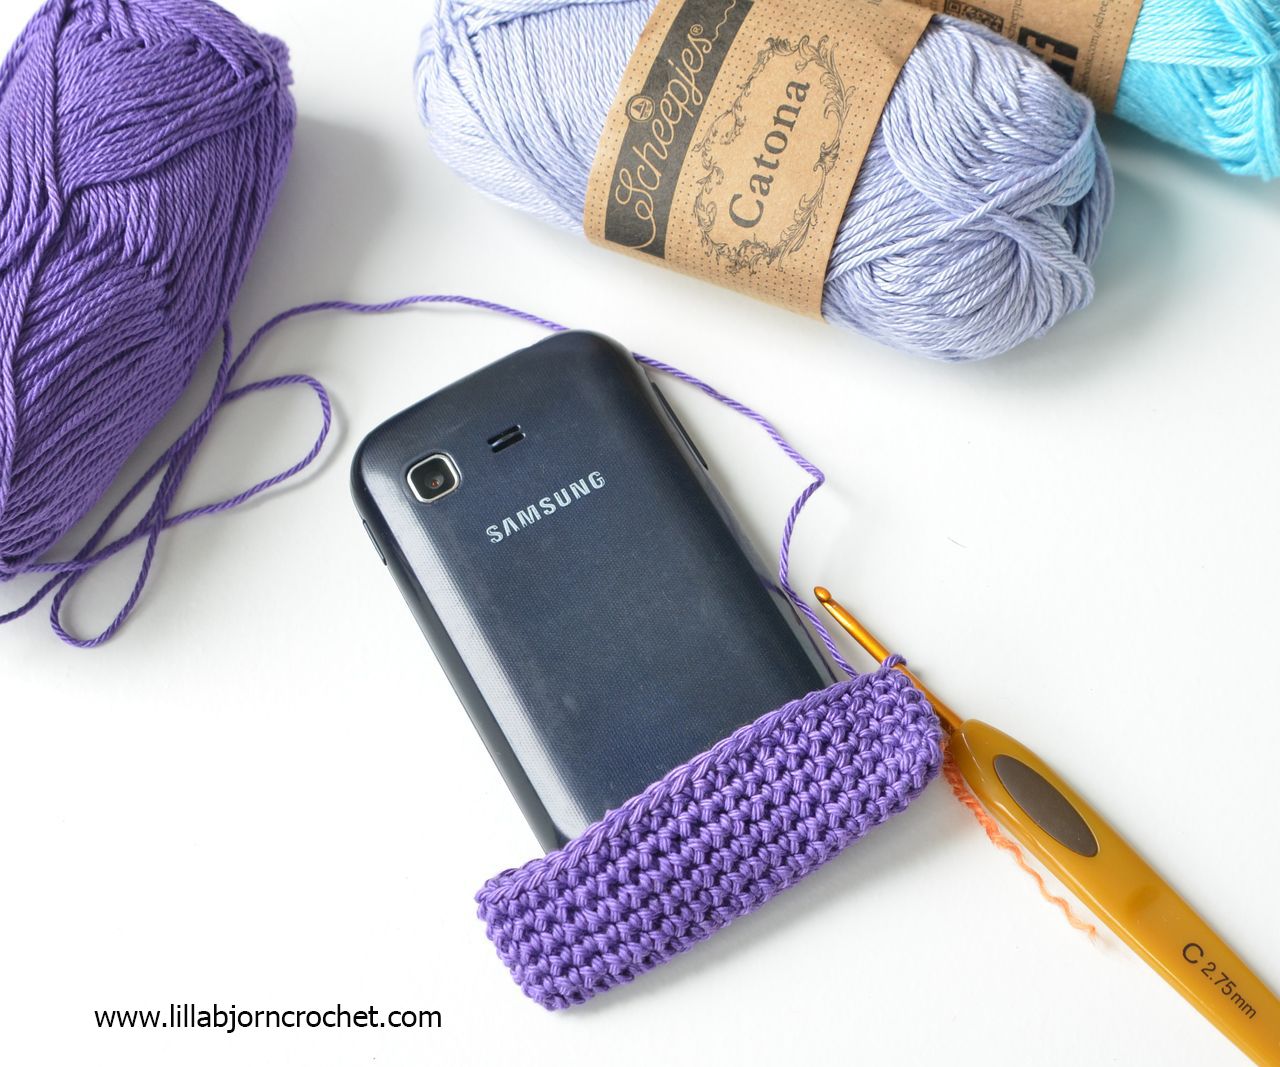 Easy to make crocheted cozy for a mobile phone or tablet. With small mandala decor. Free pattern by Lilla Bjorn Crochet